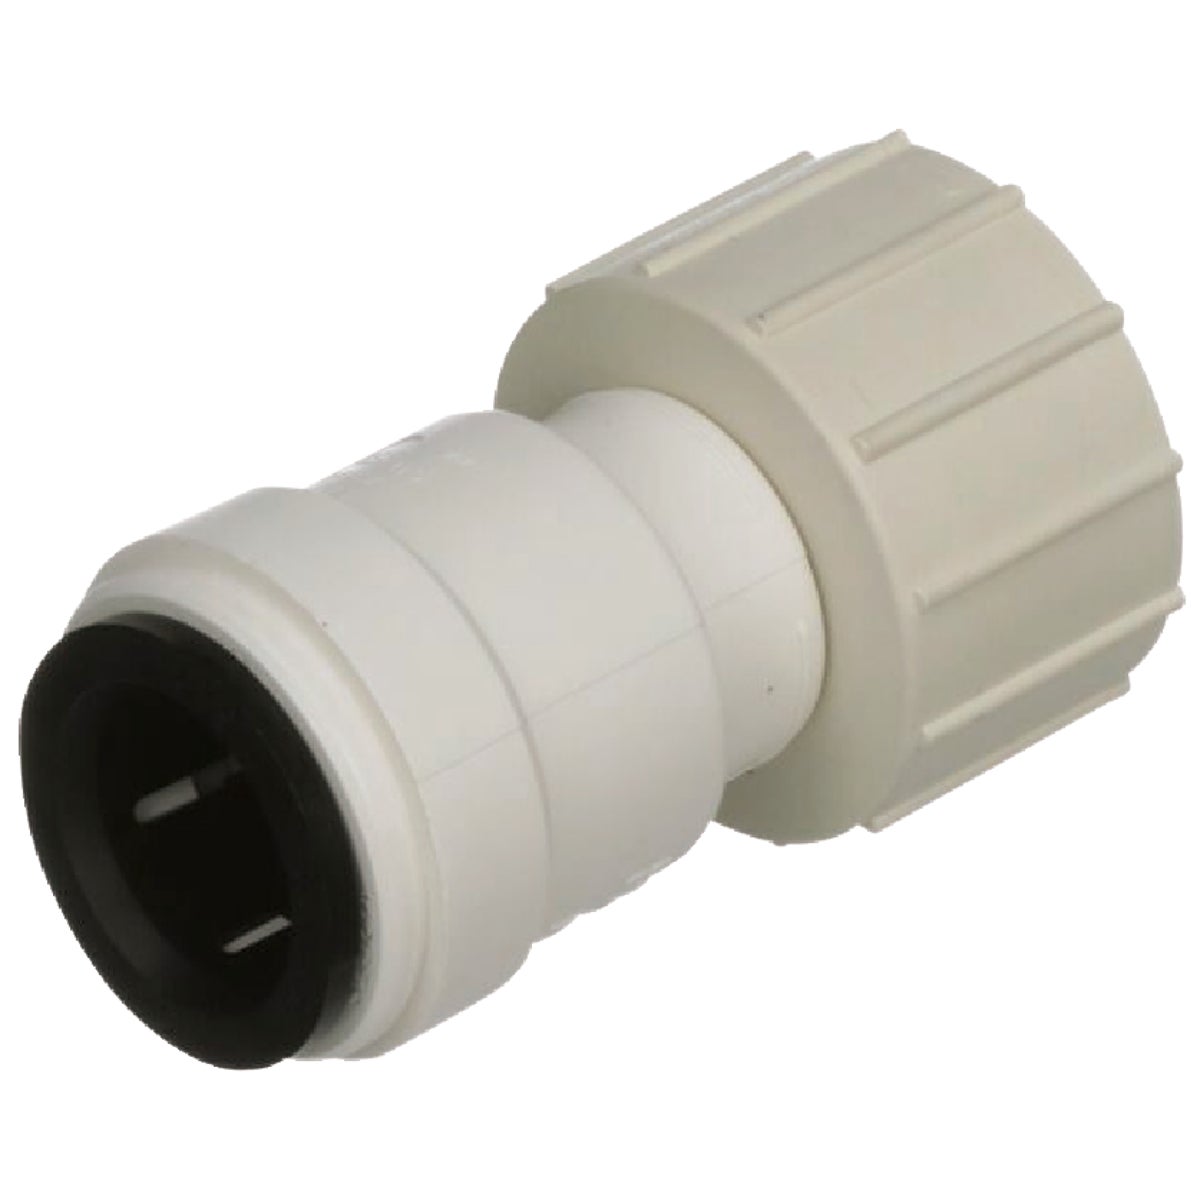 Watts Aqualock 3/8 In. CTS x 1/2 In. FPT Push-to-Connect Plastic Adapter